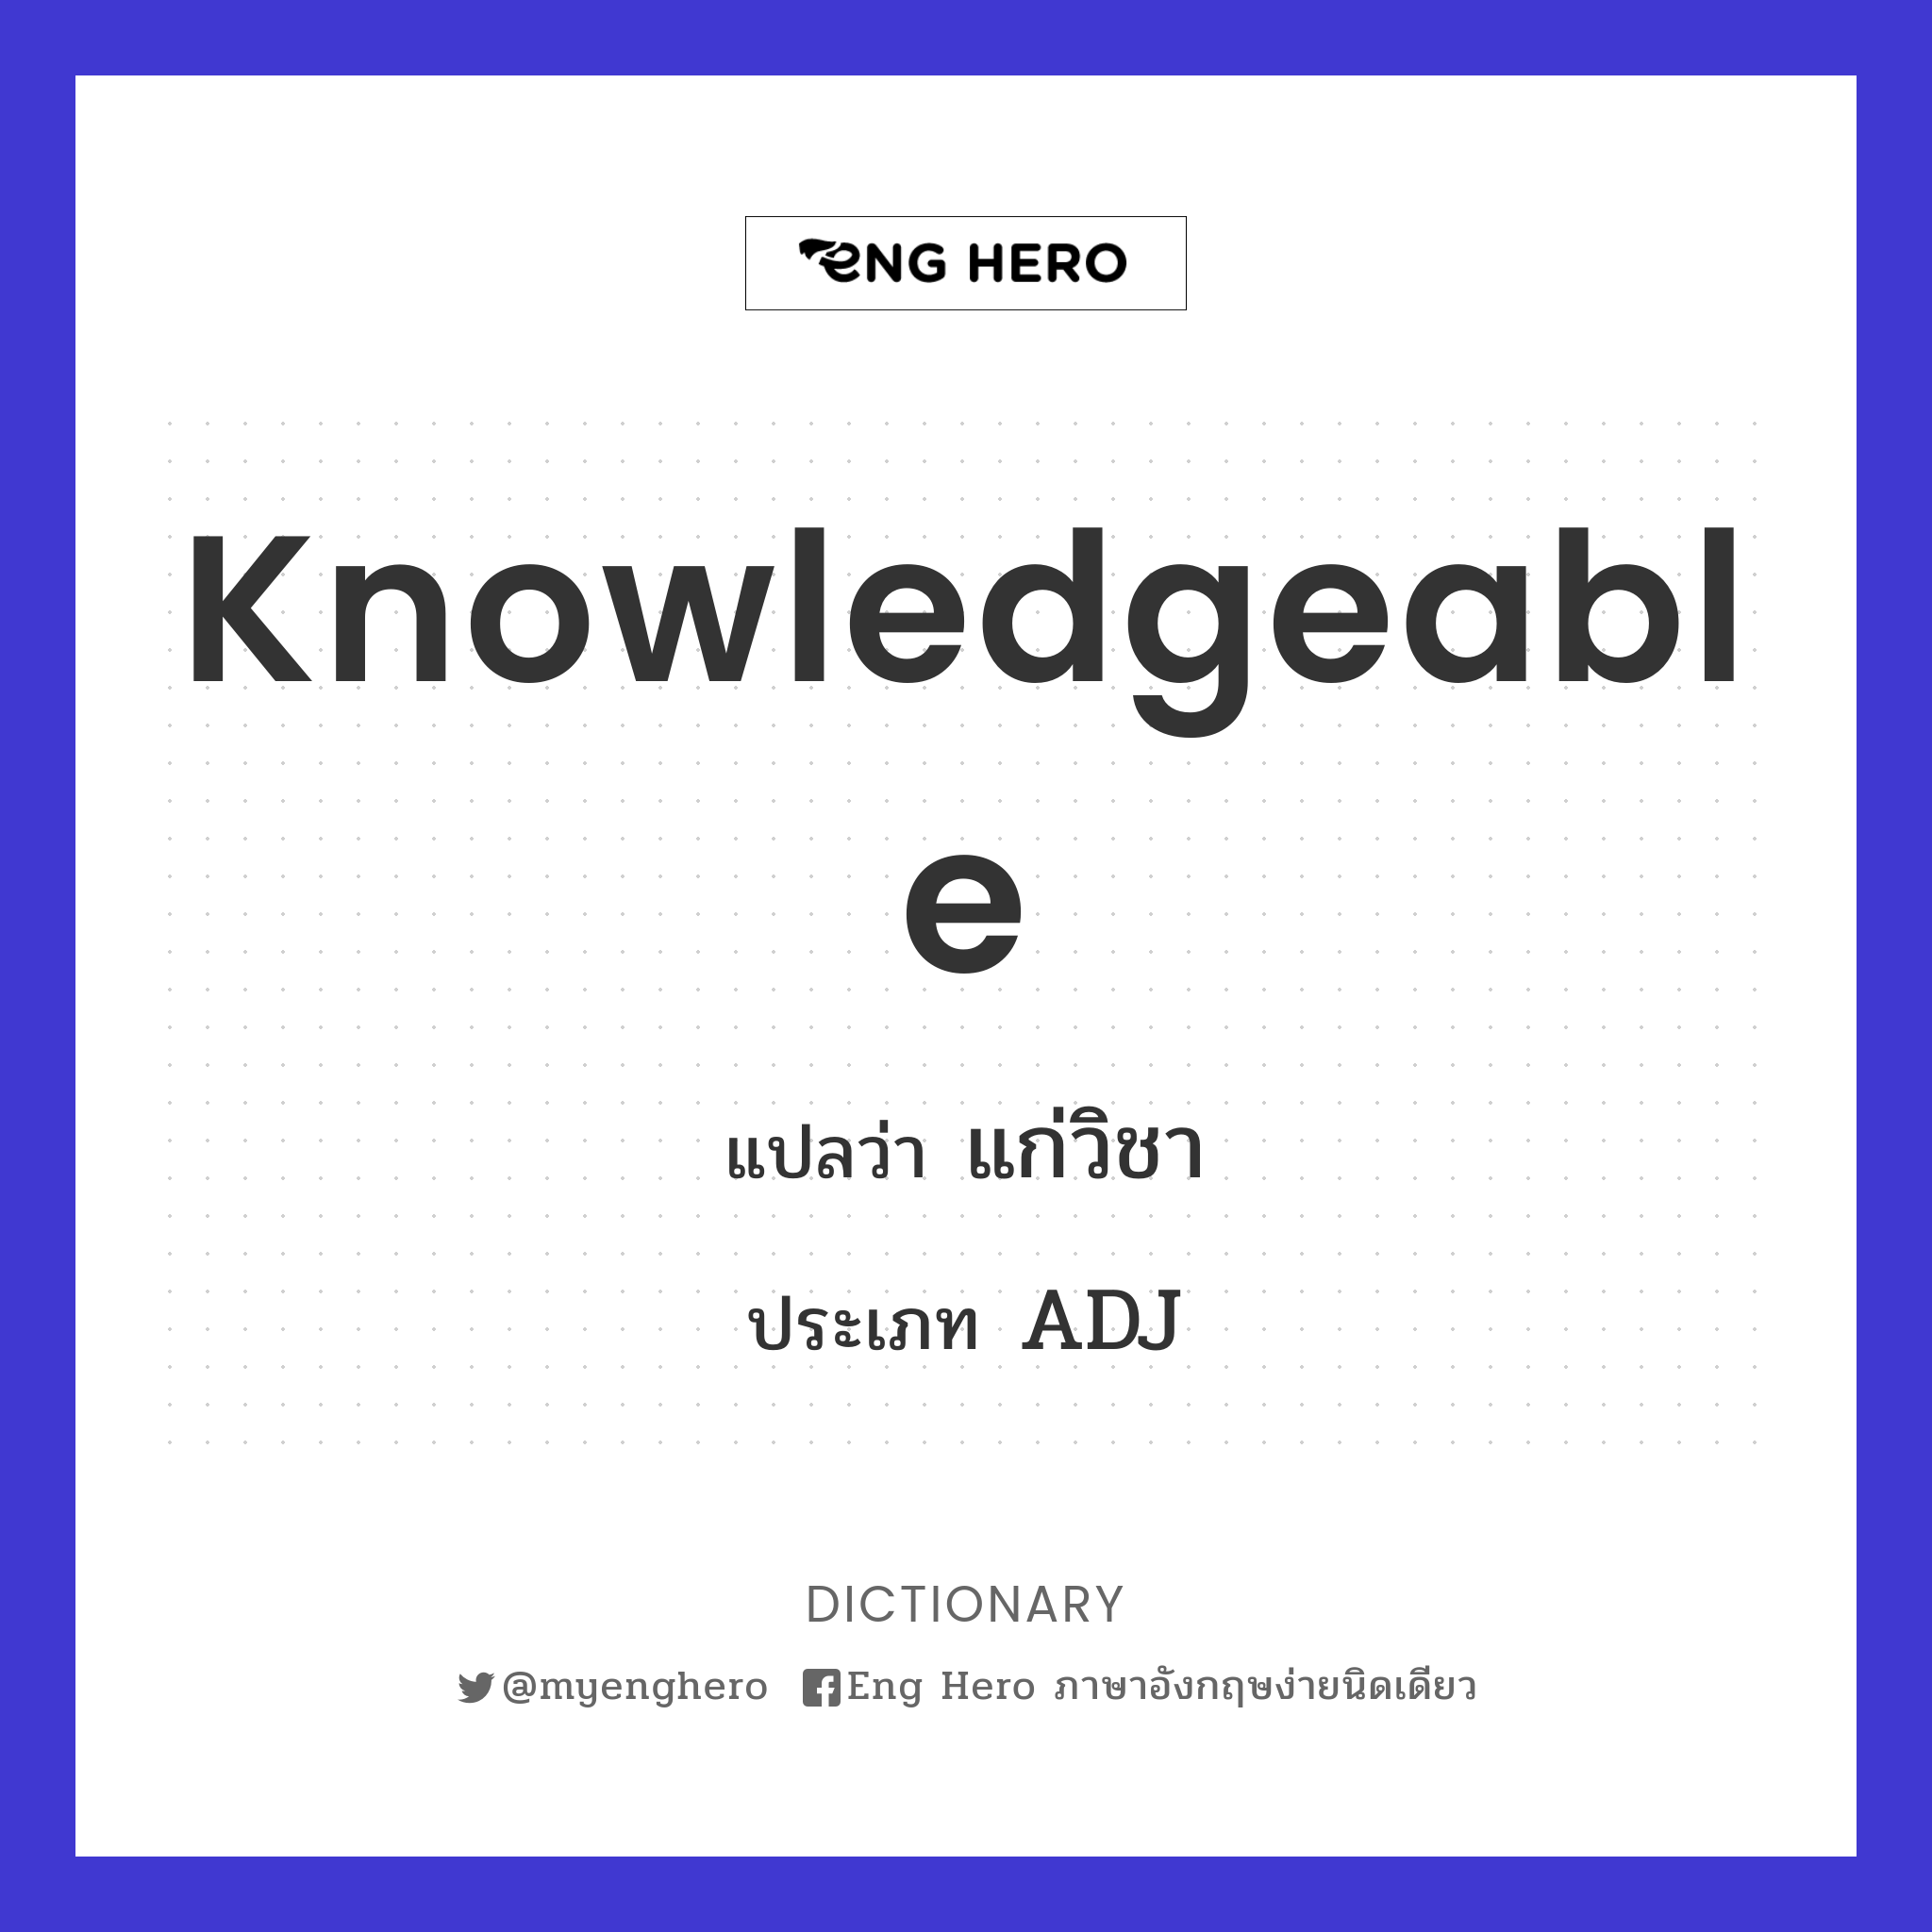 knowledgeable